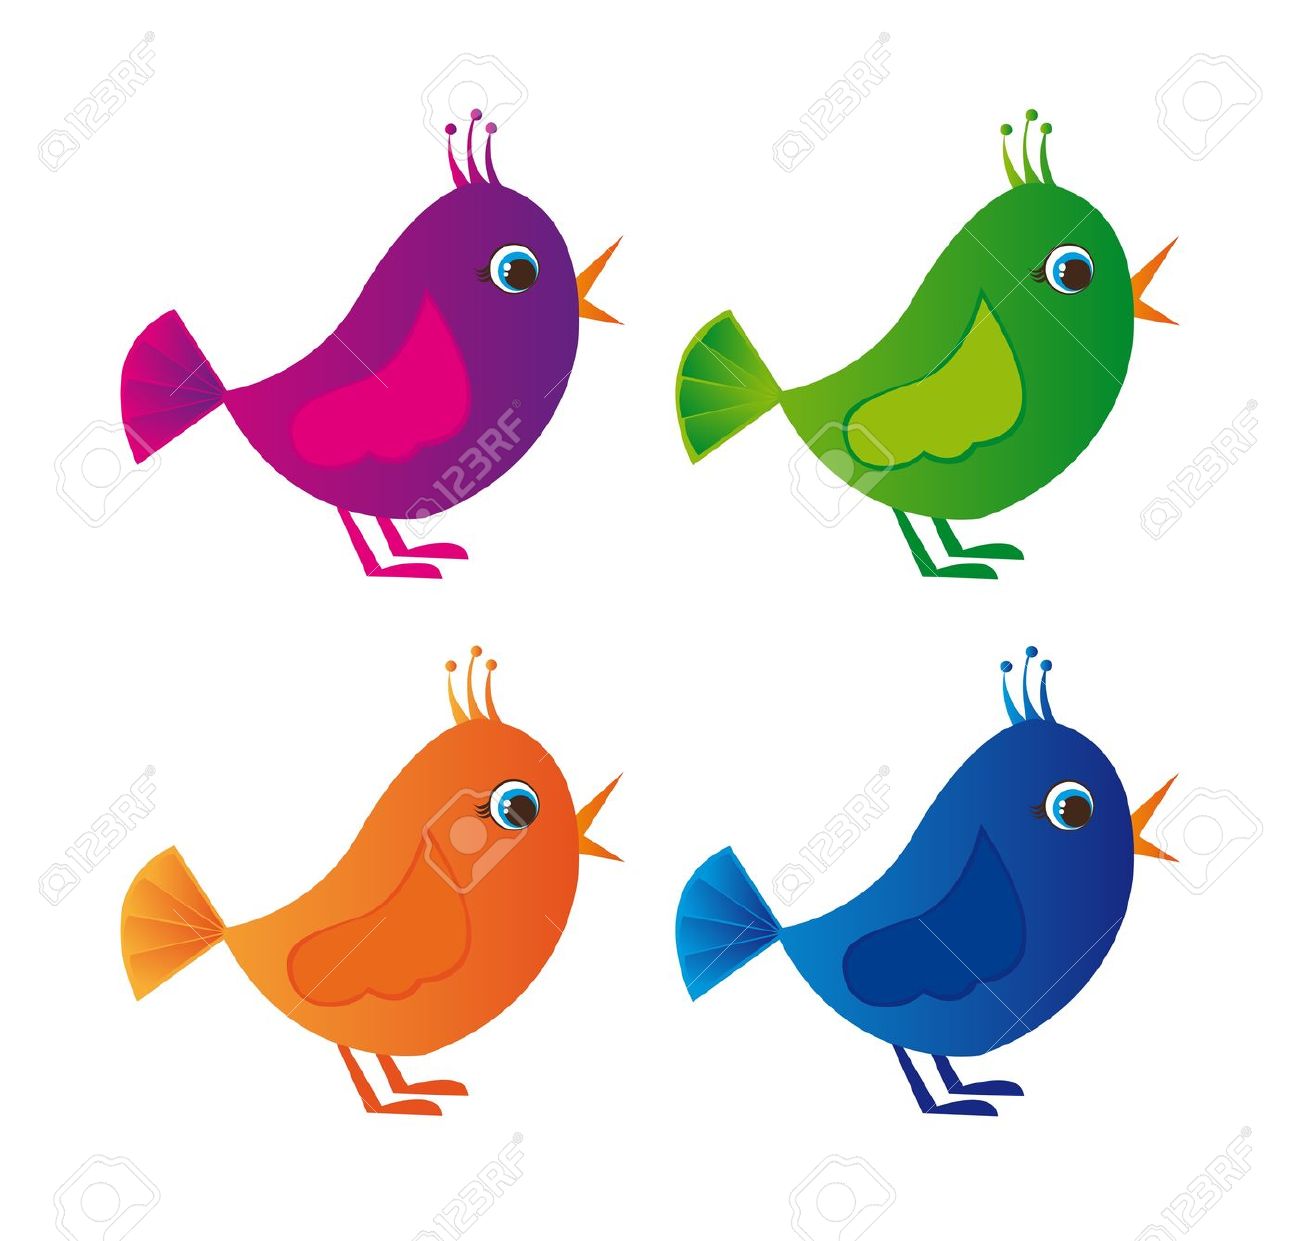 Violet,green, Orange, Blue Colorful Birds Isolated Over White.